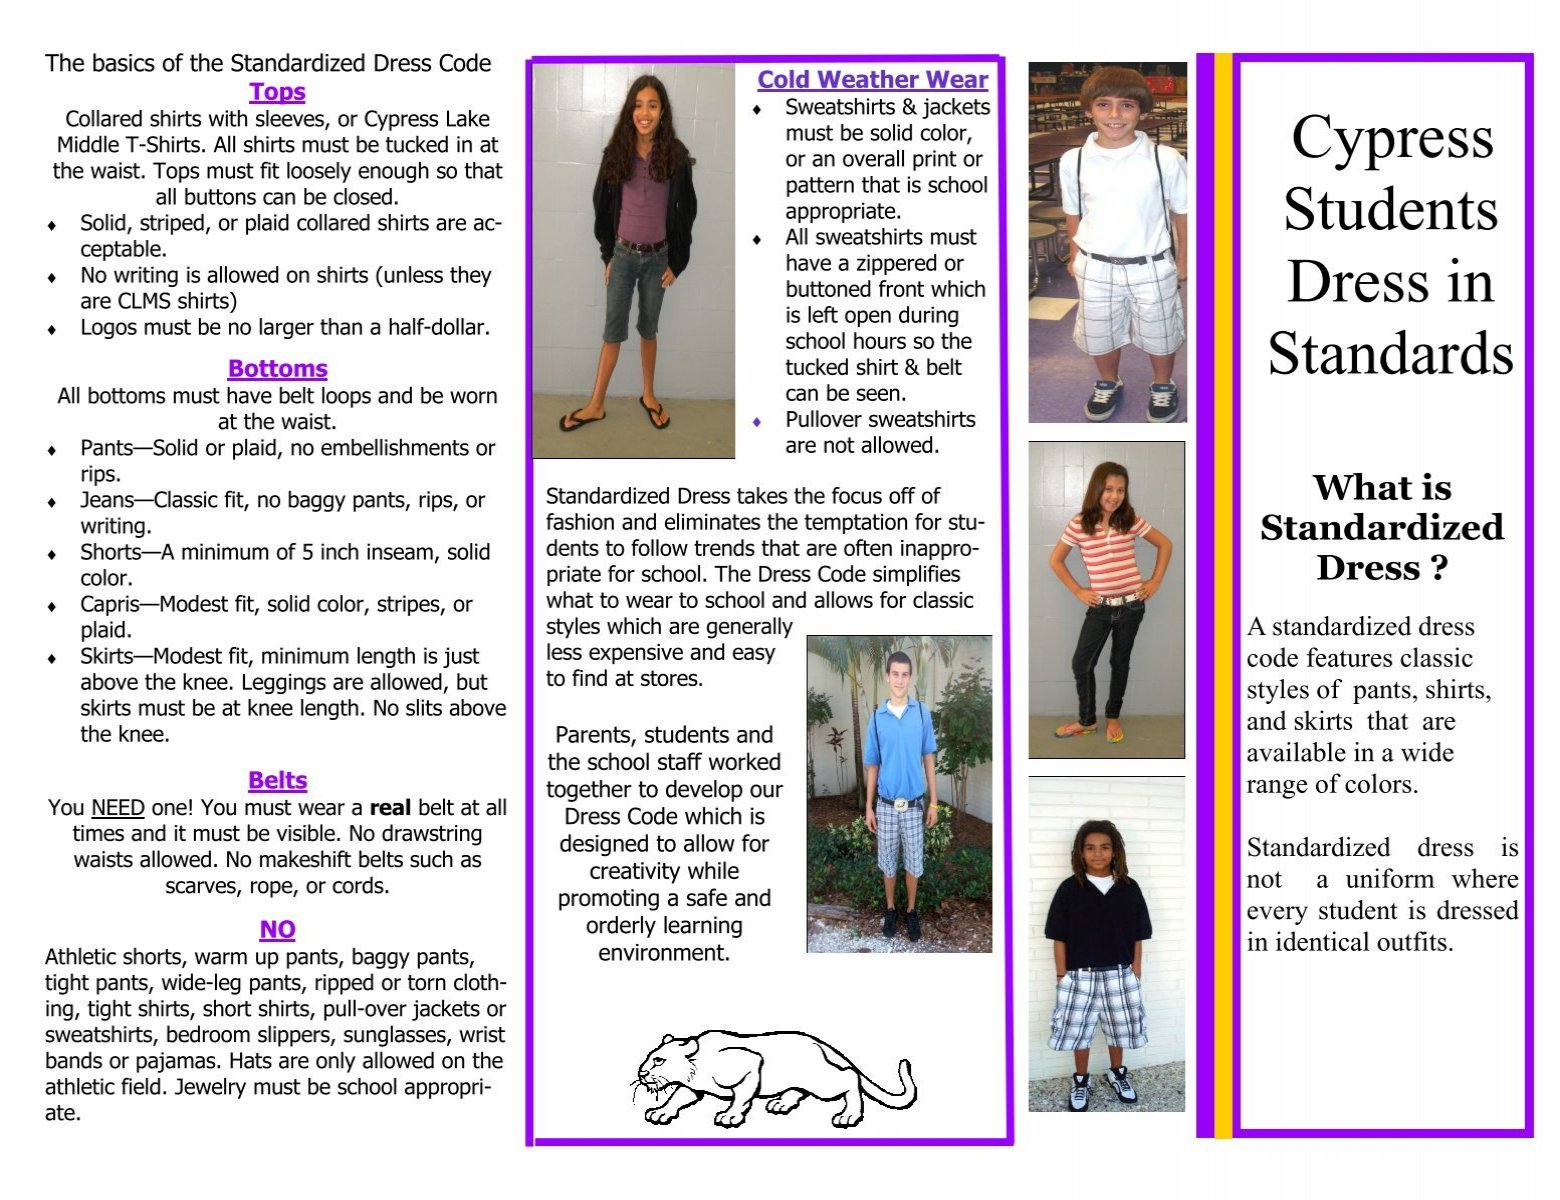 2009 Dress Code Brochure 1 Of 2 Cypress Lake Middle School - clothes codes roblox high school all about costumes